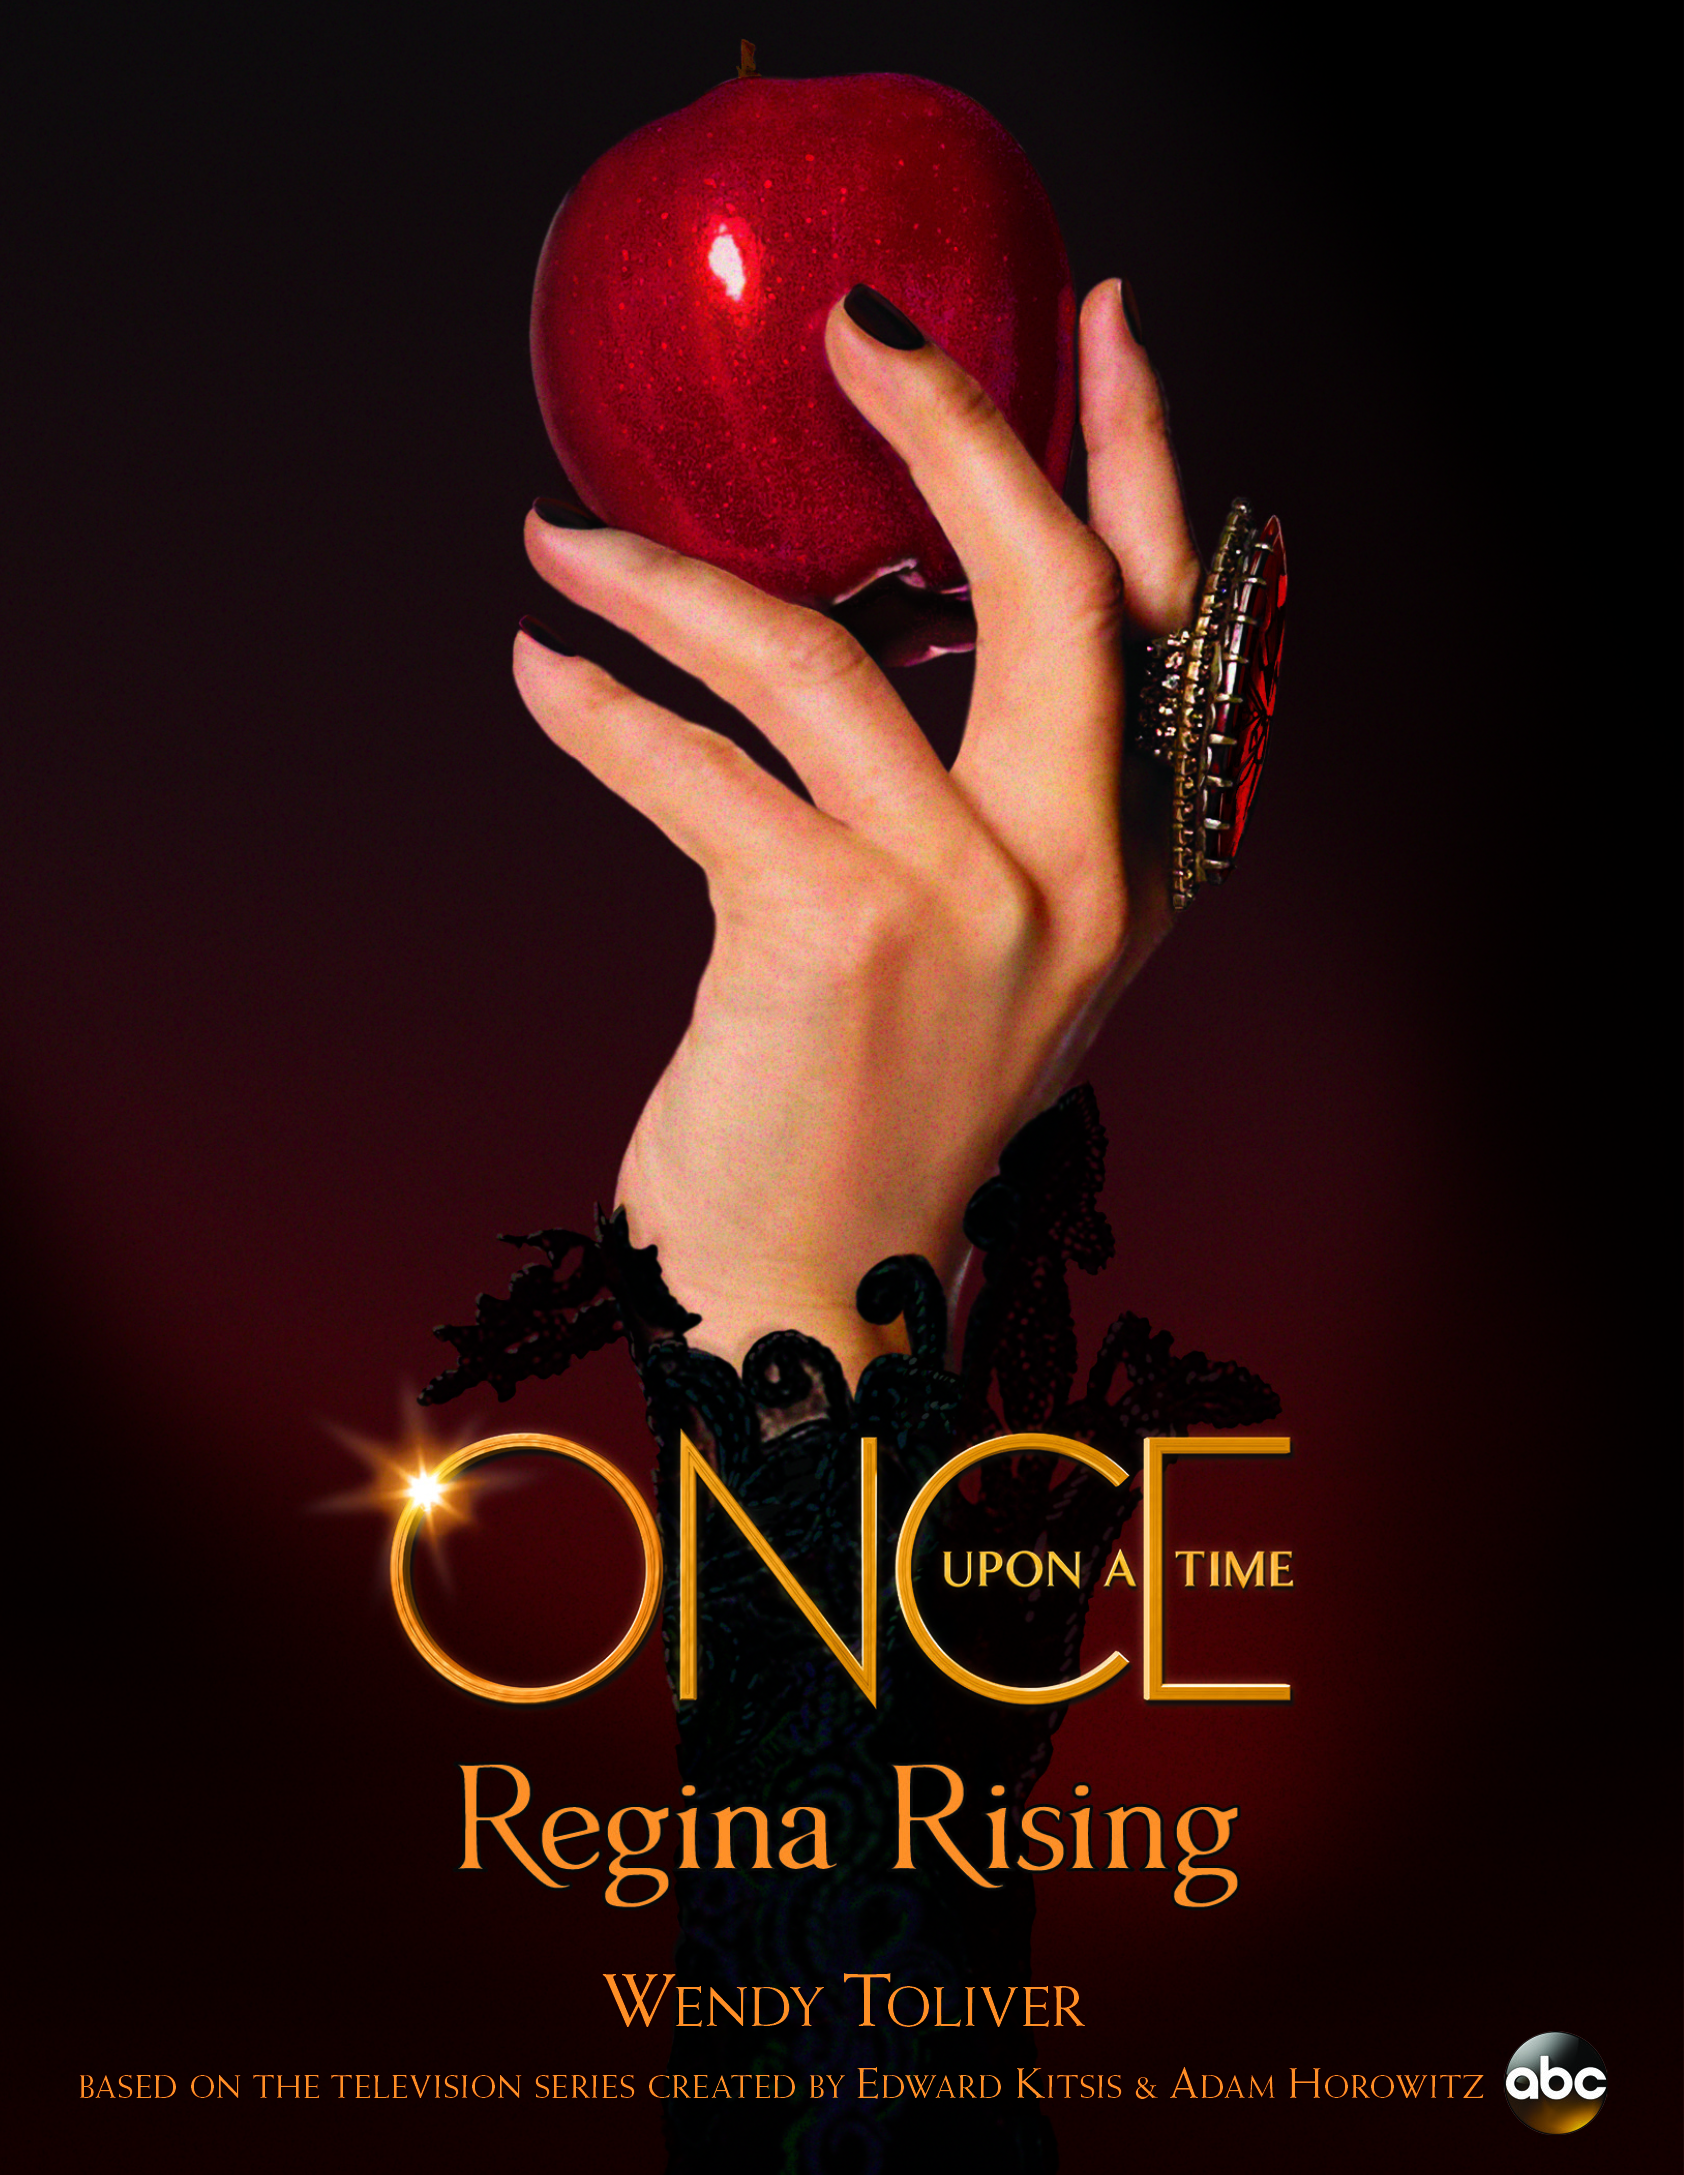 Once Upon a Time: Regina Rising